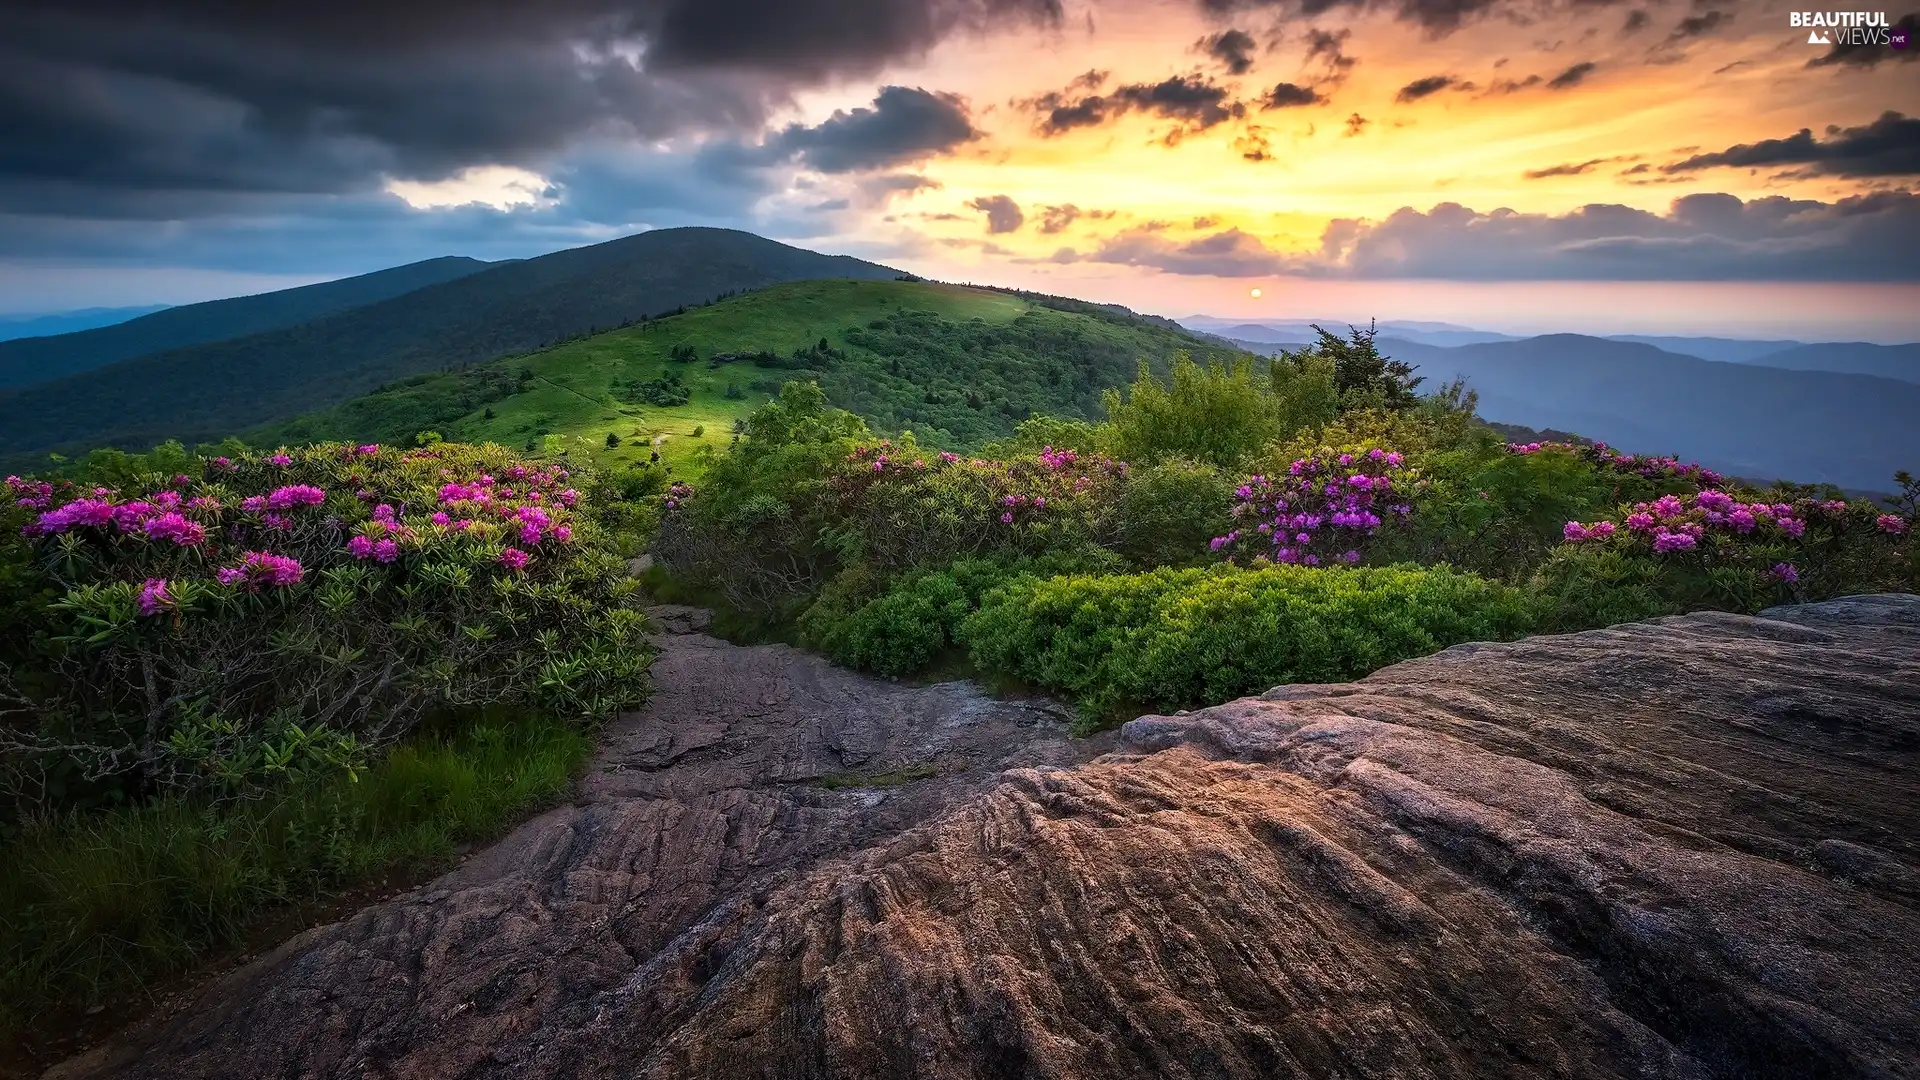 Rhododendron, Tennessee State, Appalachian National Scenic Trail, clouds, Roan Mountain, The United States, Appalachian Mountains, Great Sunsets, rocks, Flowers